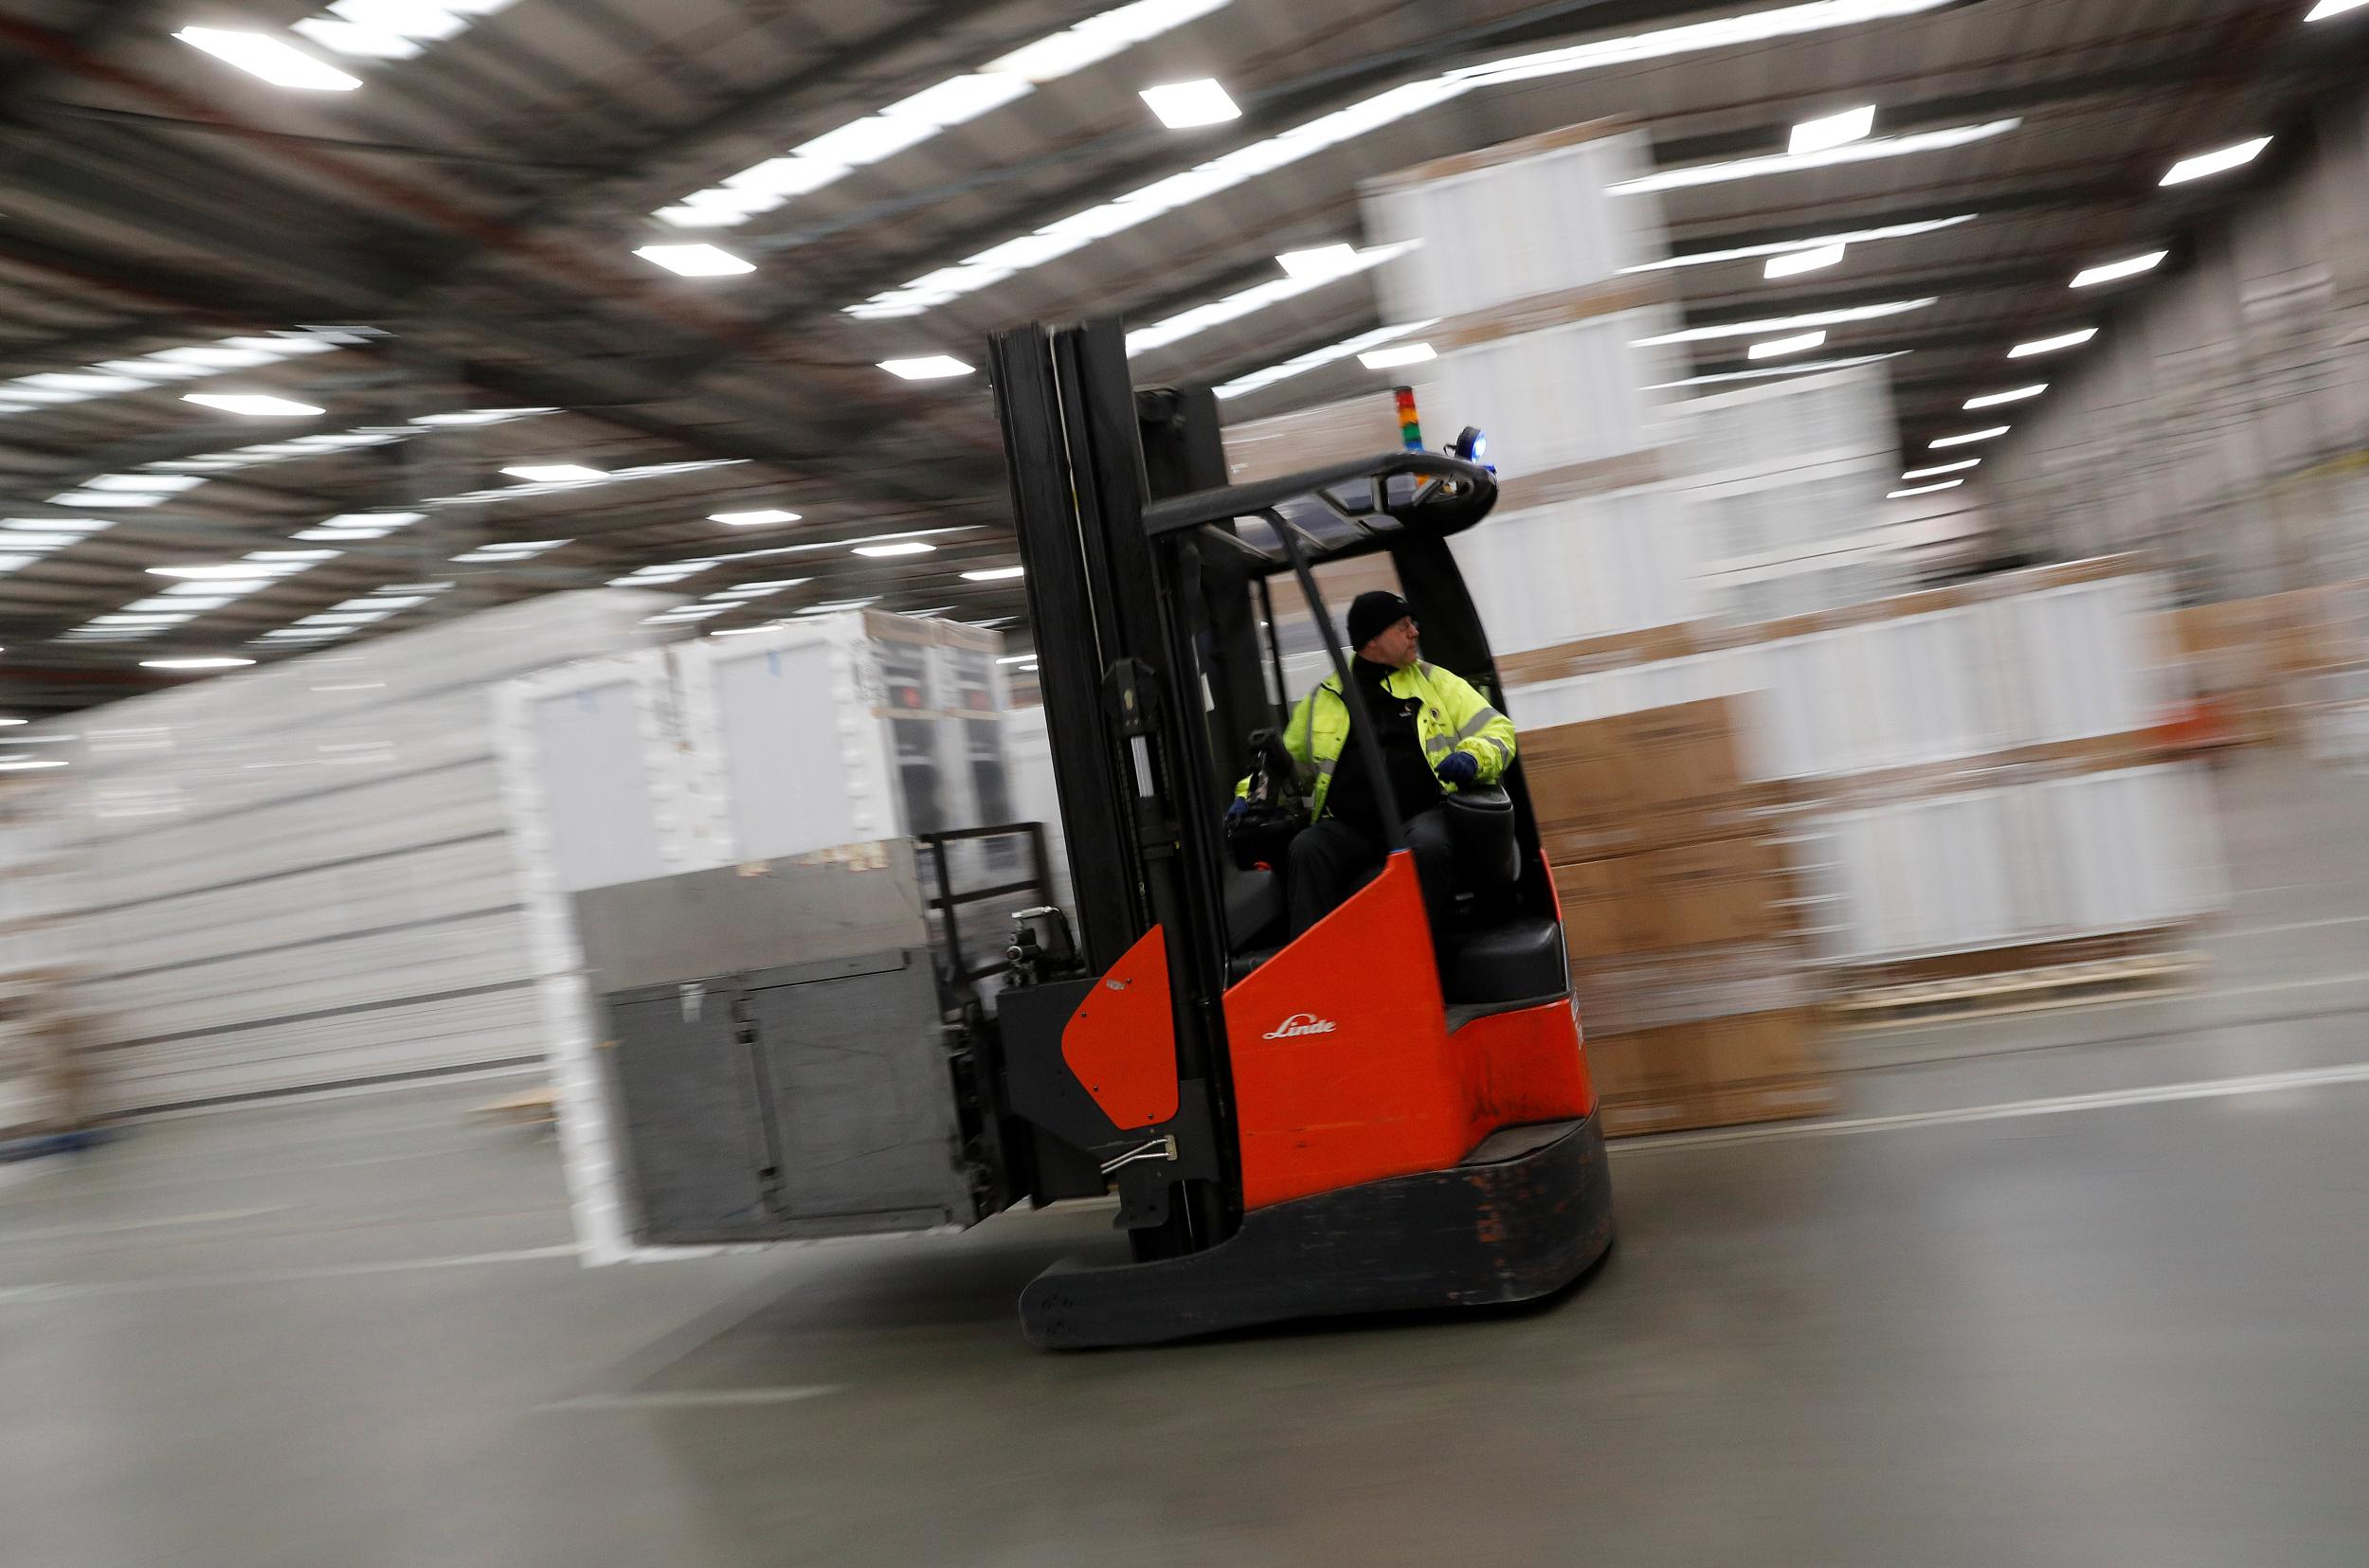 The service sector includes warehousing and truck transportation amongst other services